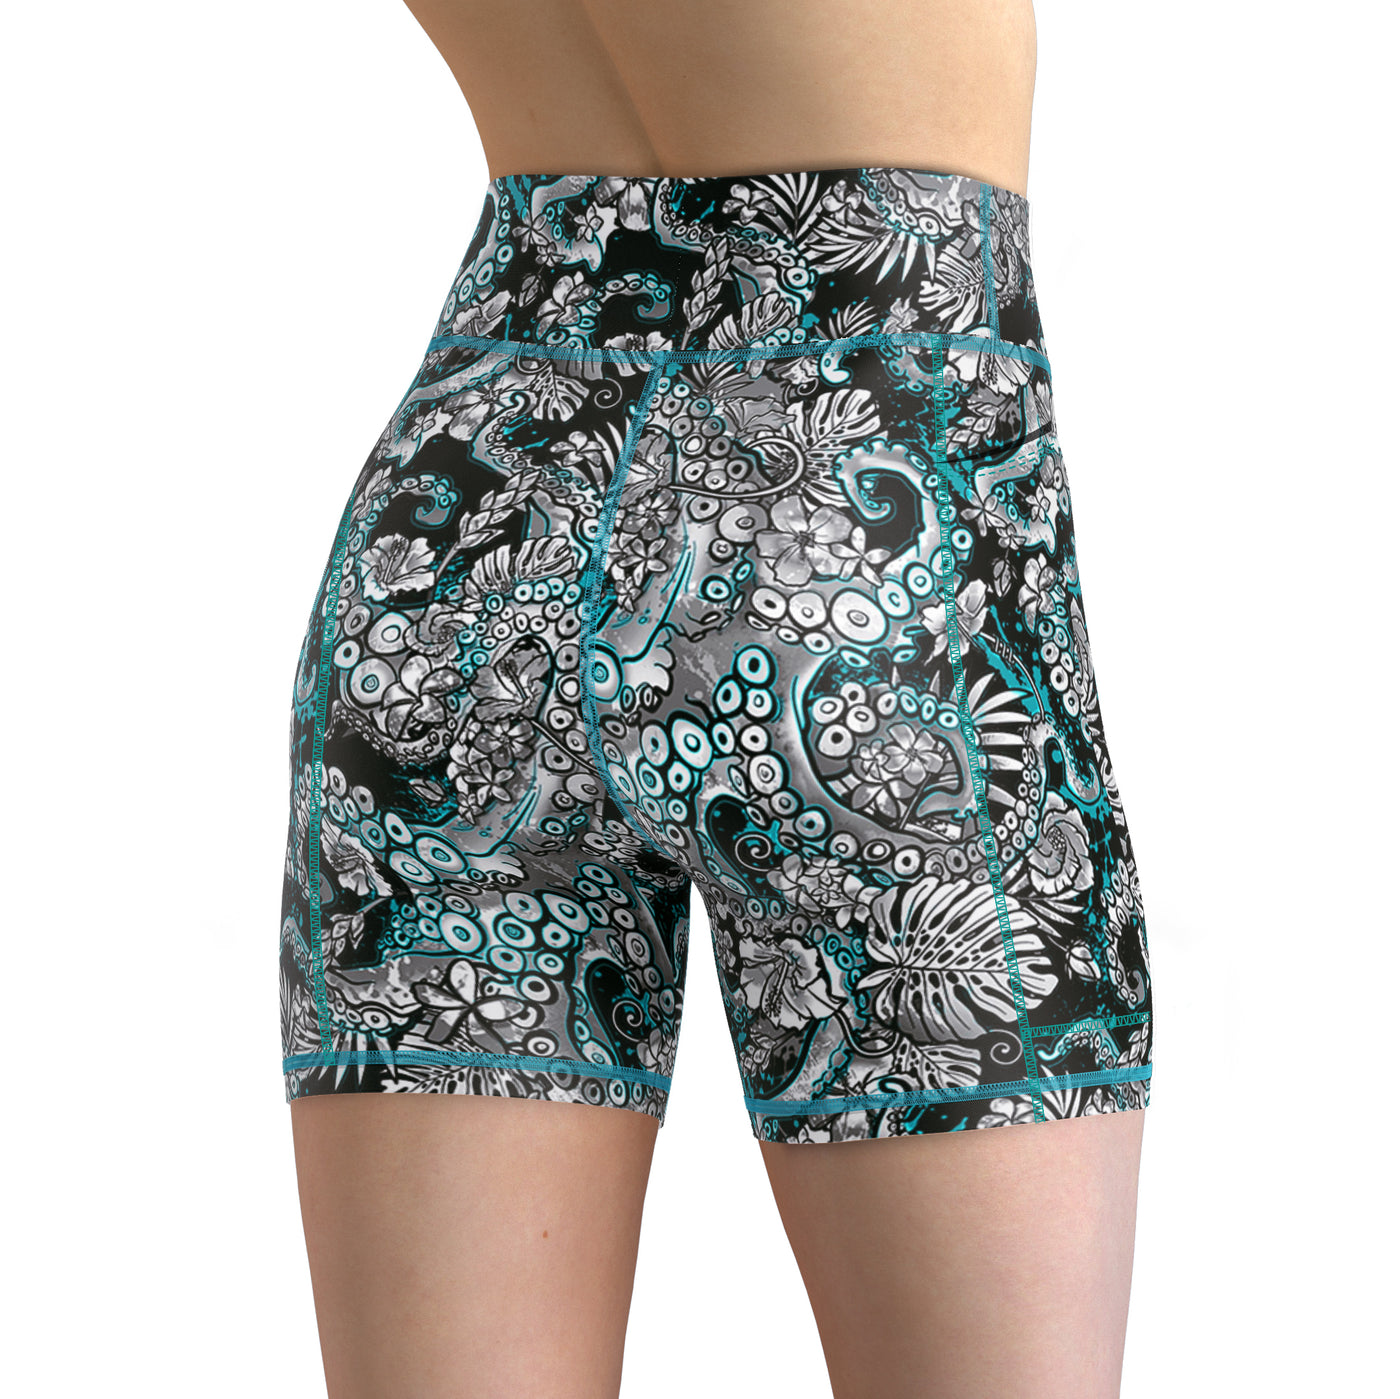 Eco-Friendly Octopus Shorts – Spacefish Army